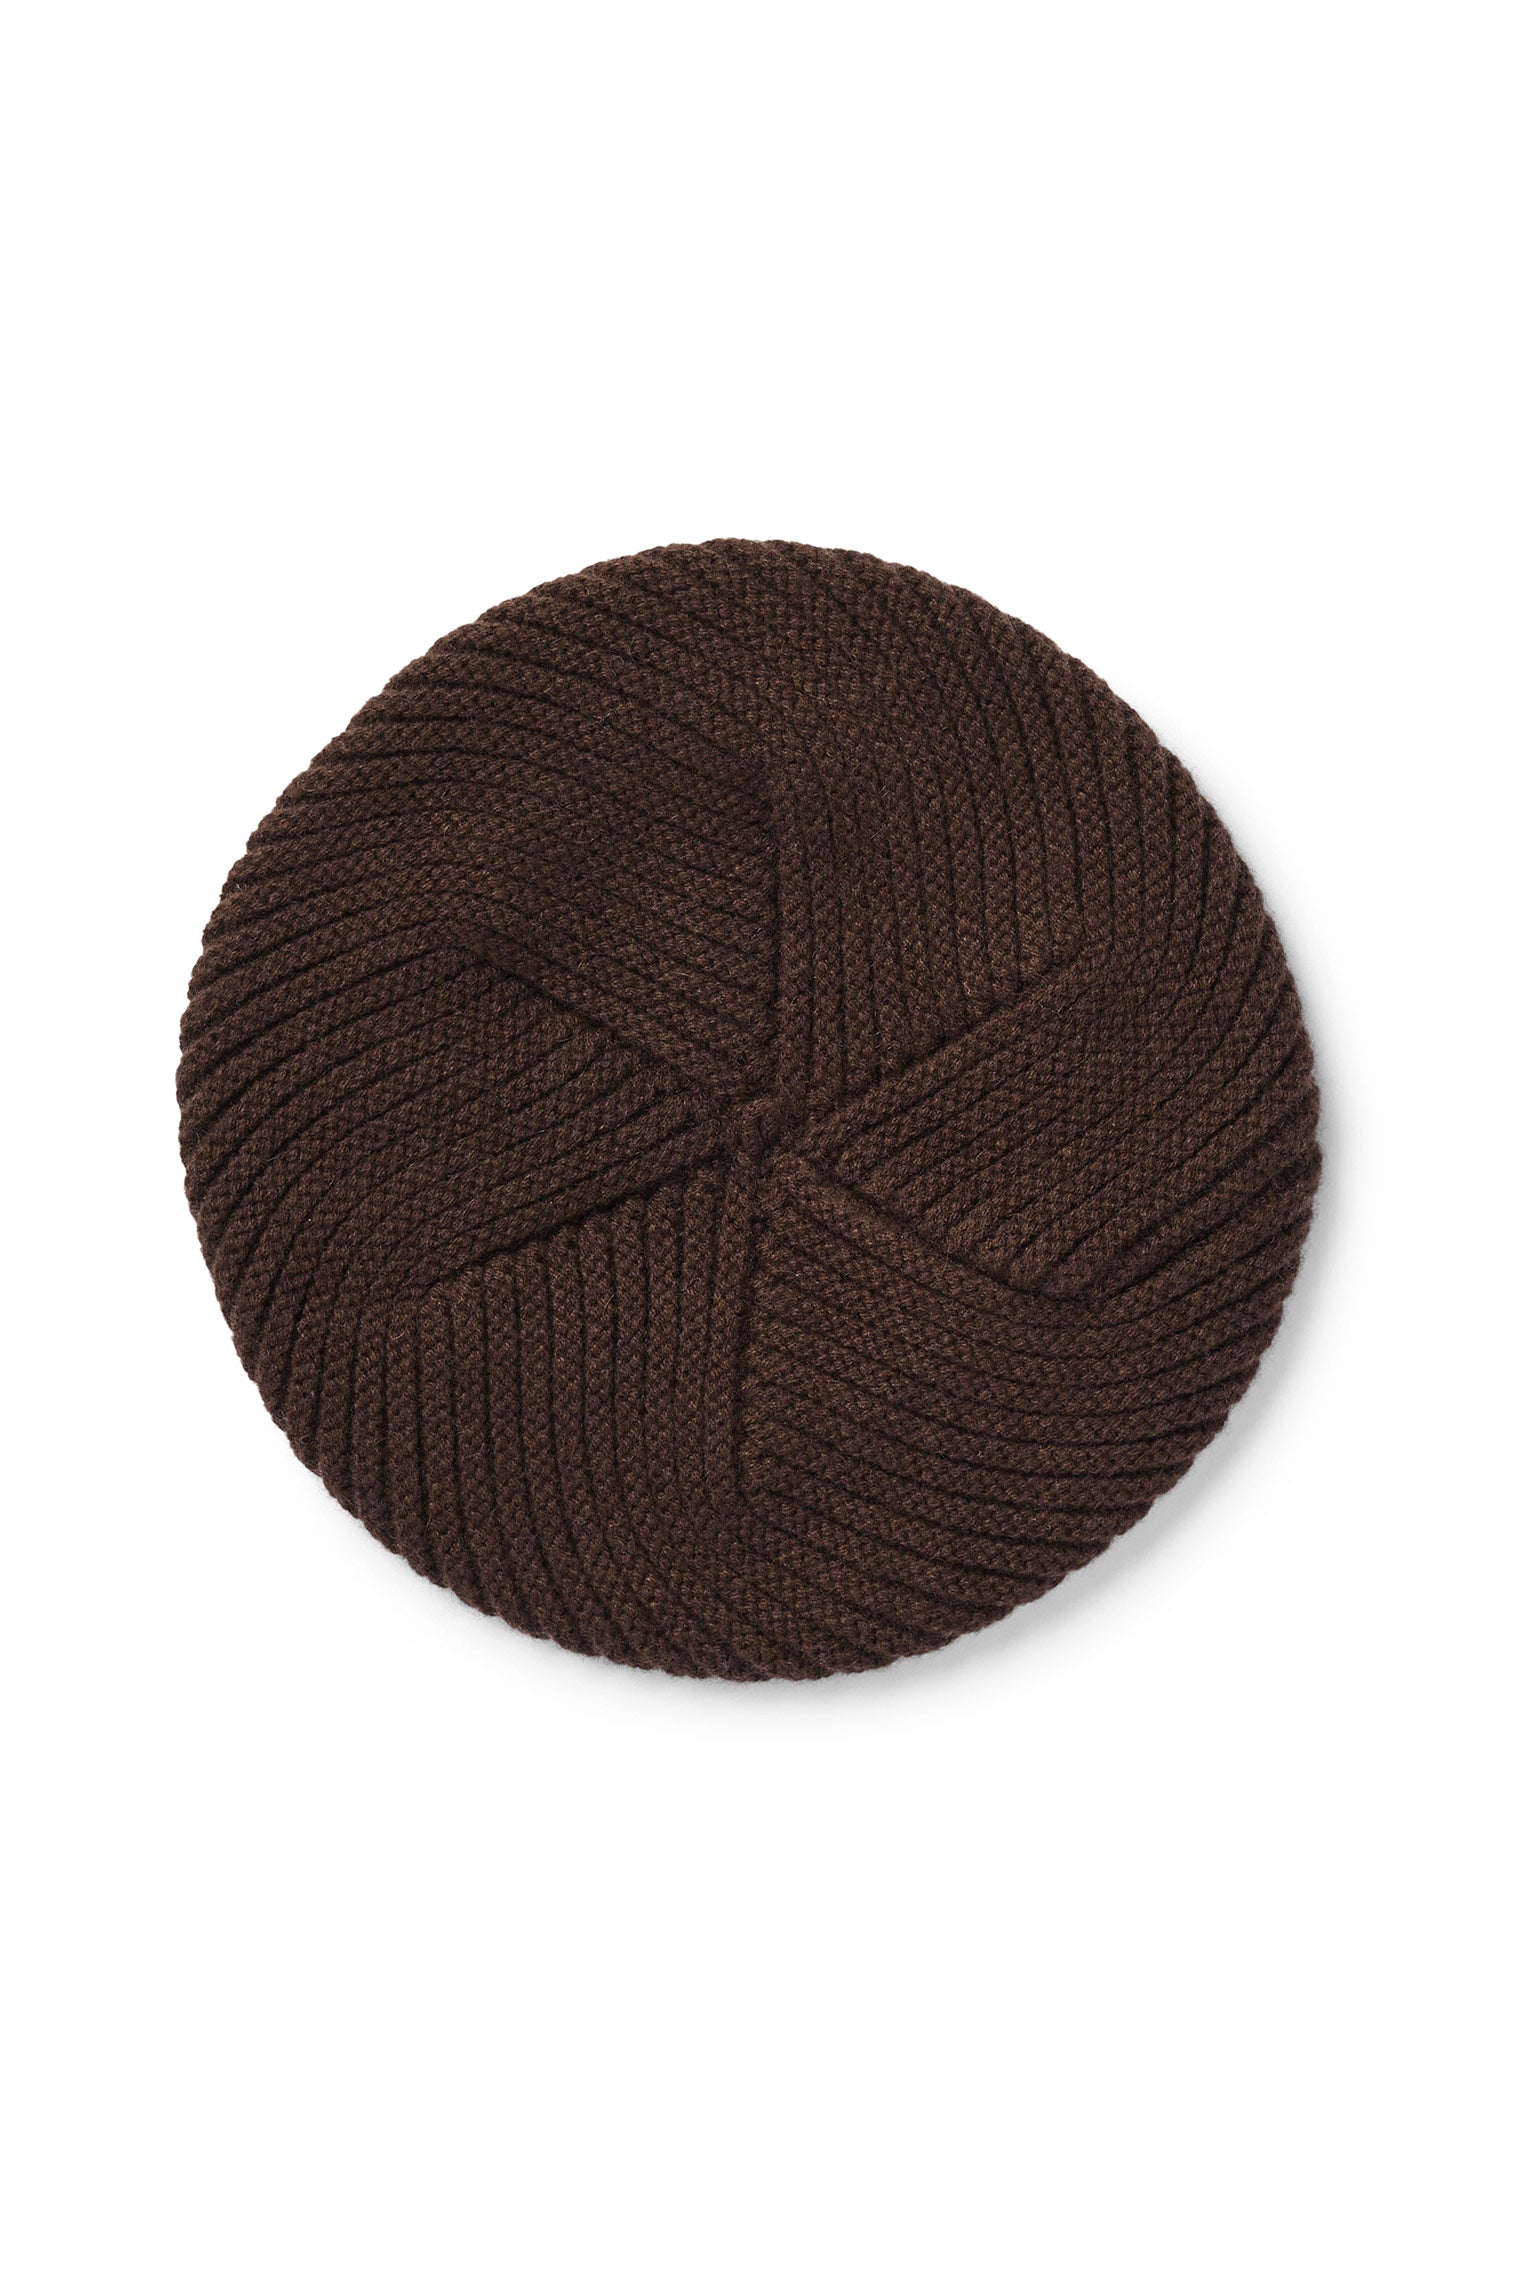 Brown Knitted Cashmere Beret - Women's Beanies - Lock & Co. Hatters London UK